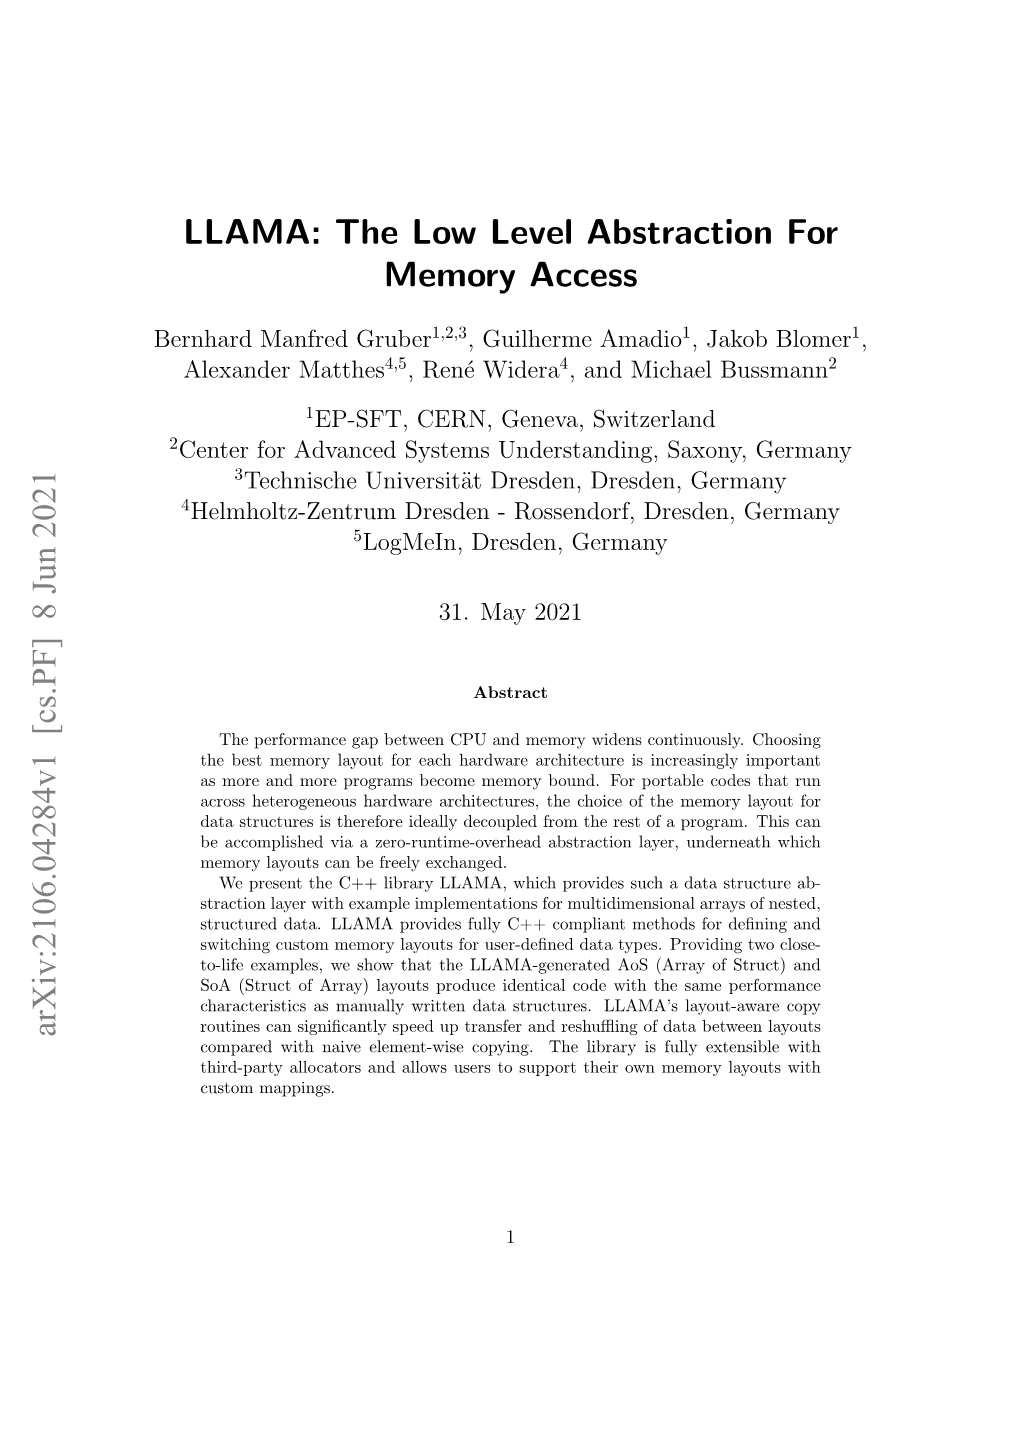 LLAMA: the Low Level Abstraction for Memory Access